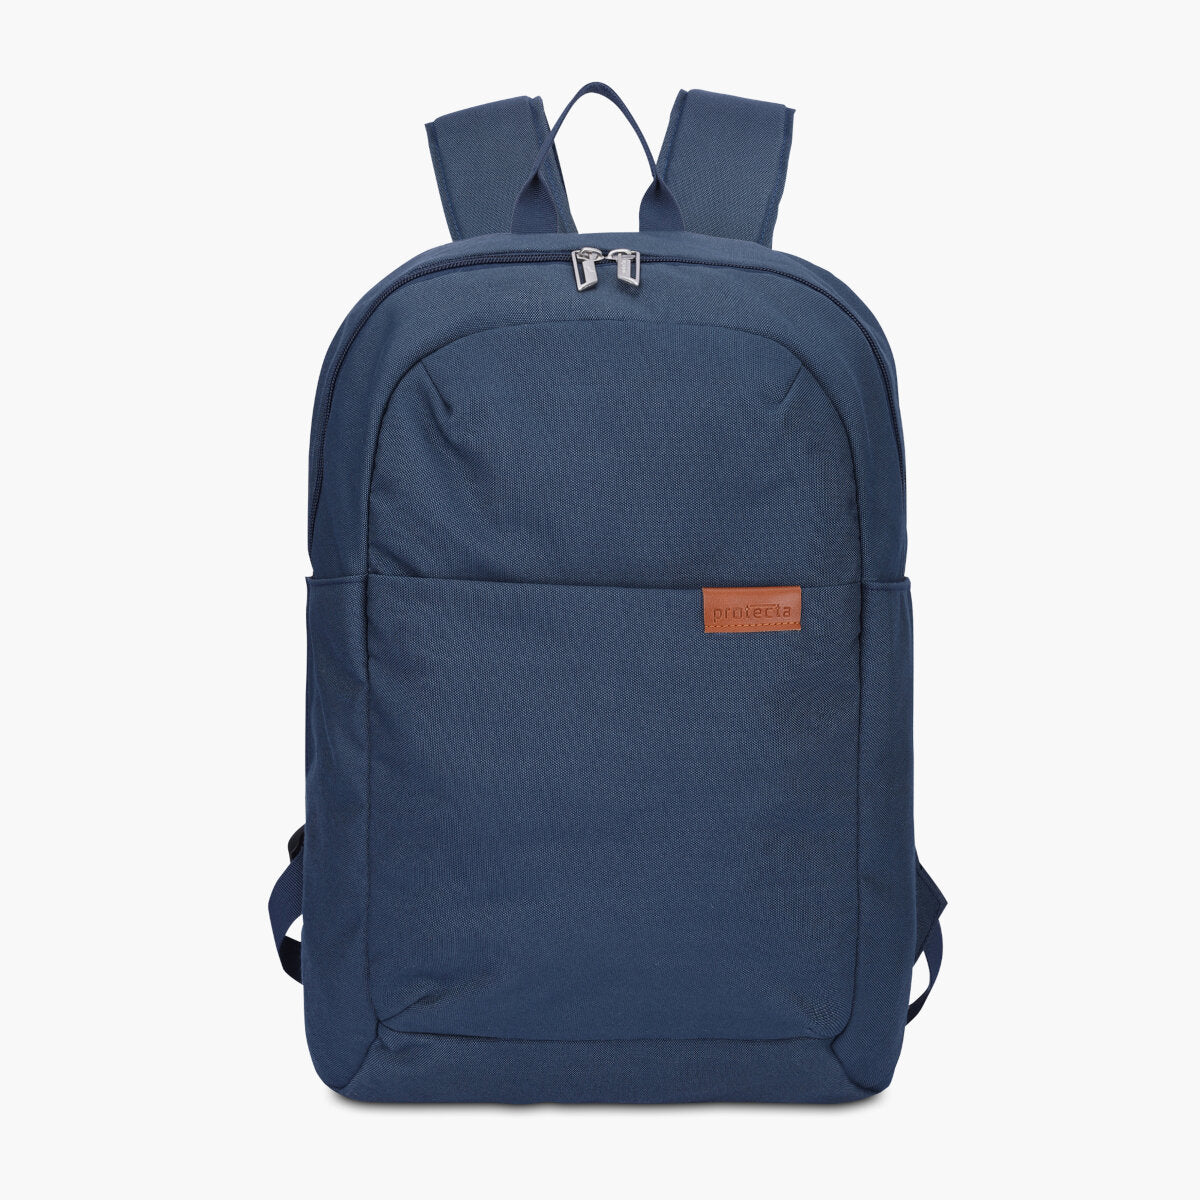 Blue | Protecta Strong Buzz Laptop Backpack - Main